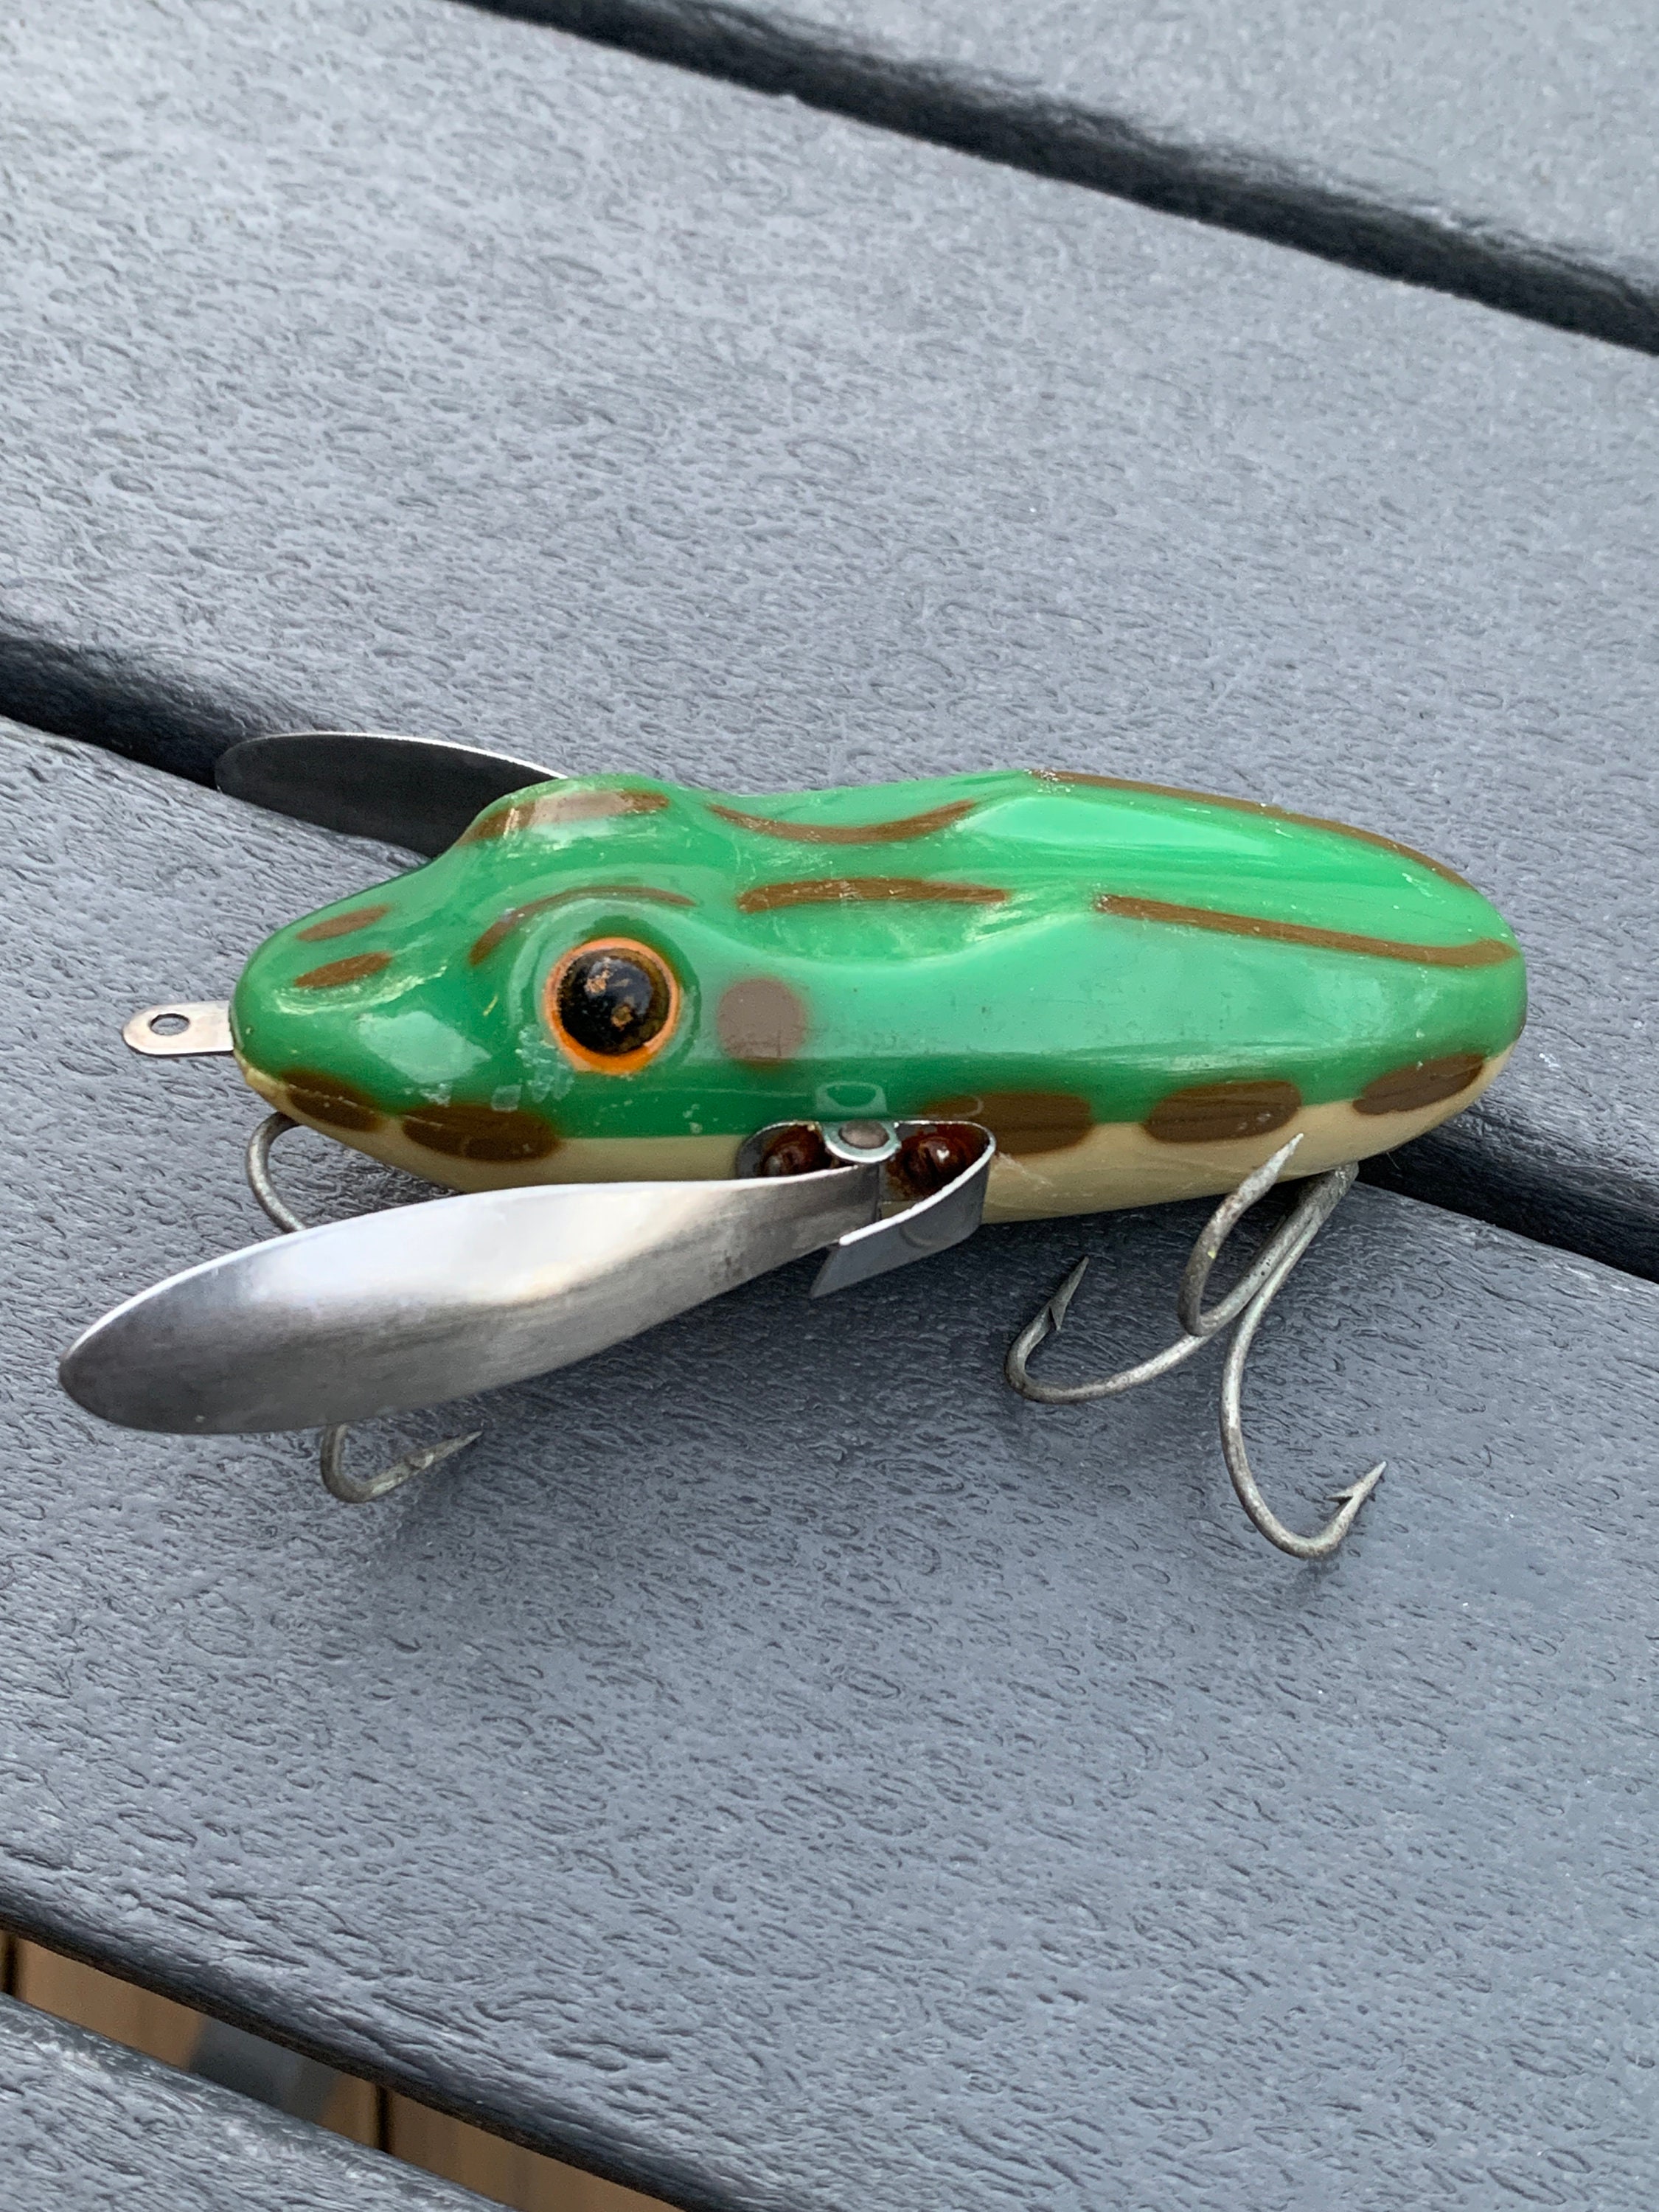 Buy Frog Lure Online In India -  India